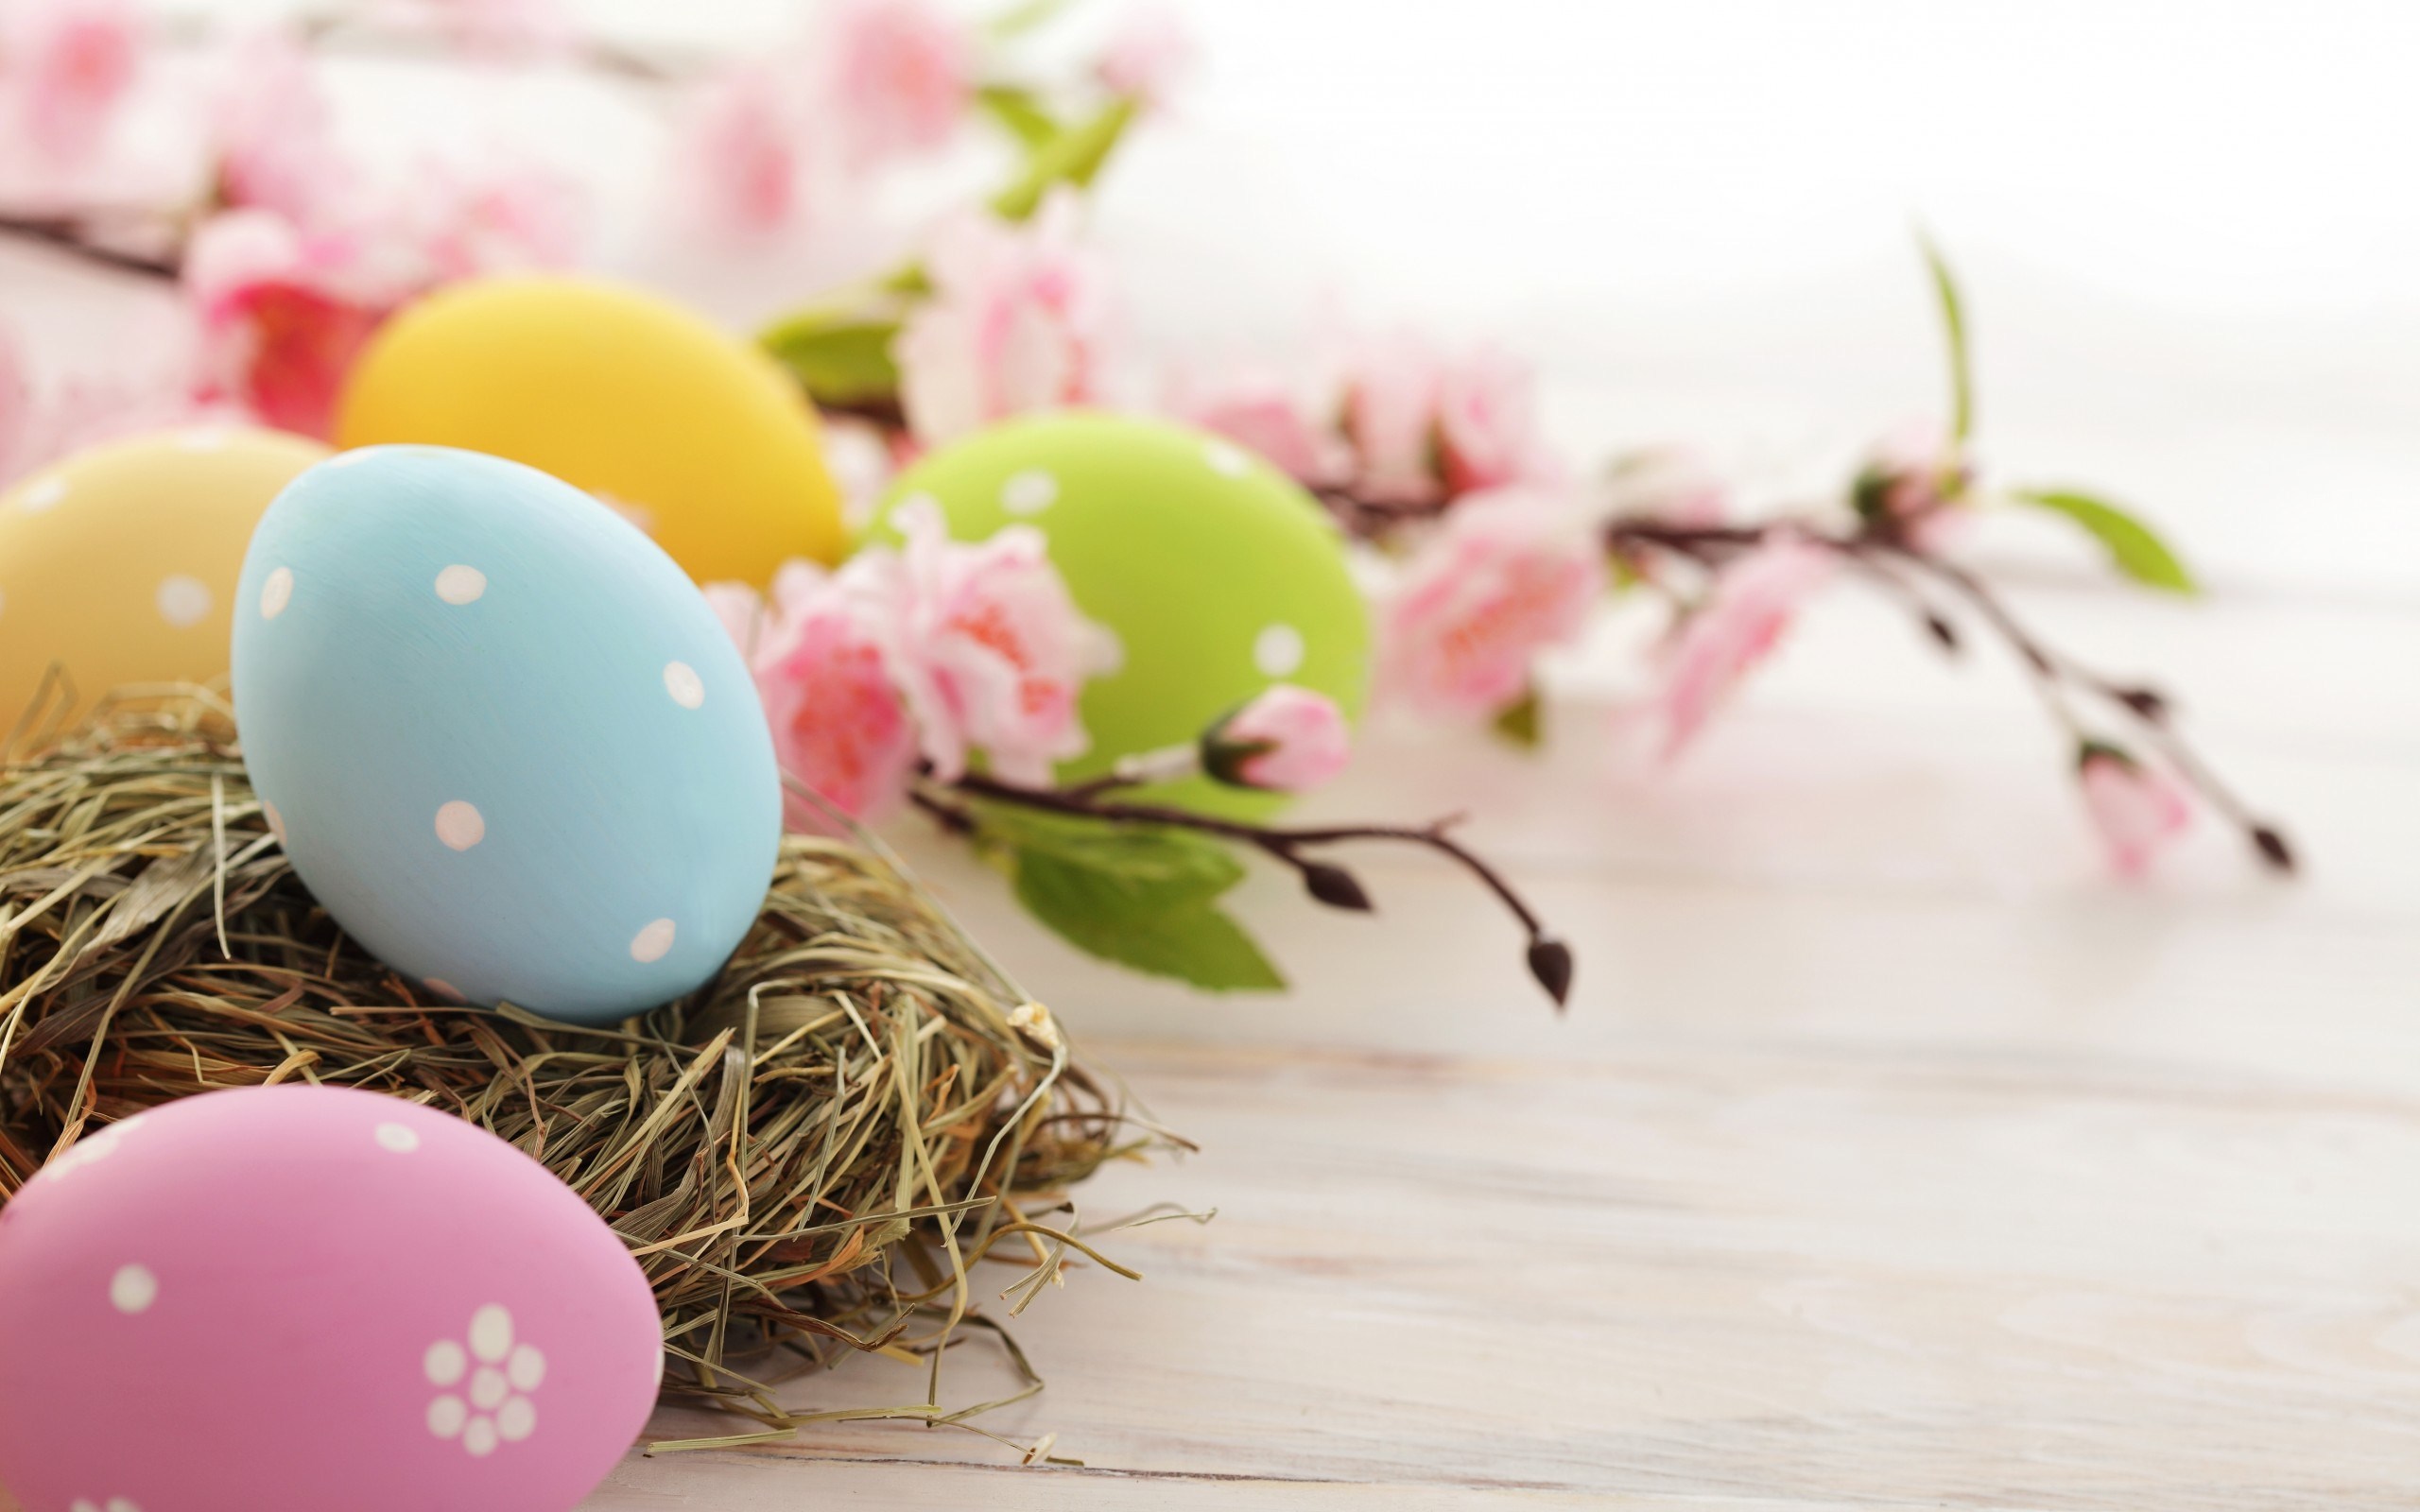 Easter wallpapers and backgrounds download for free | Page 1